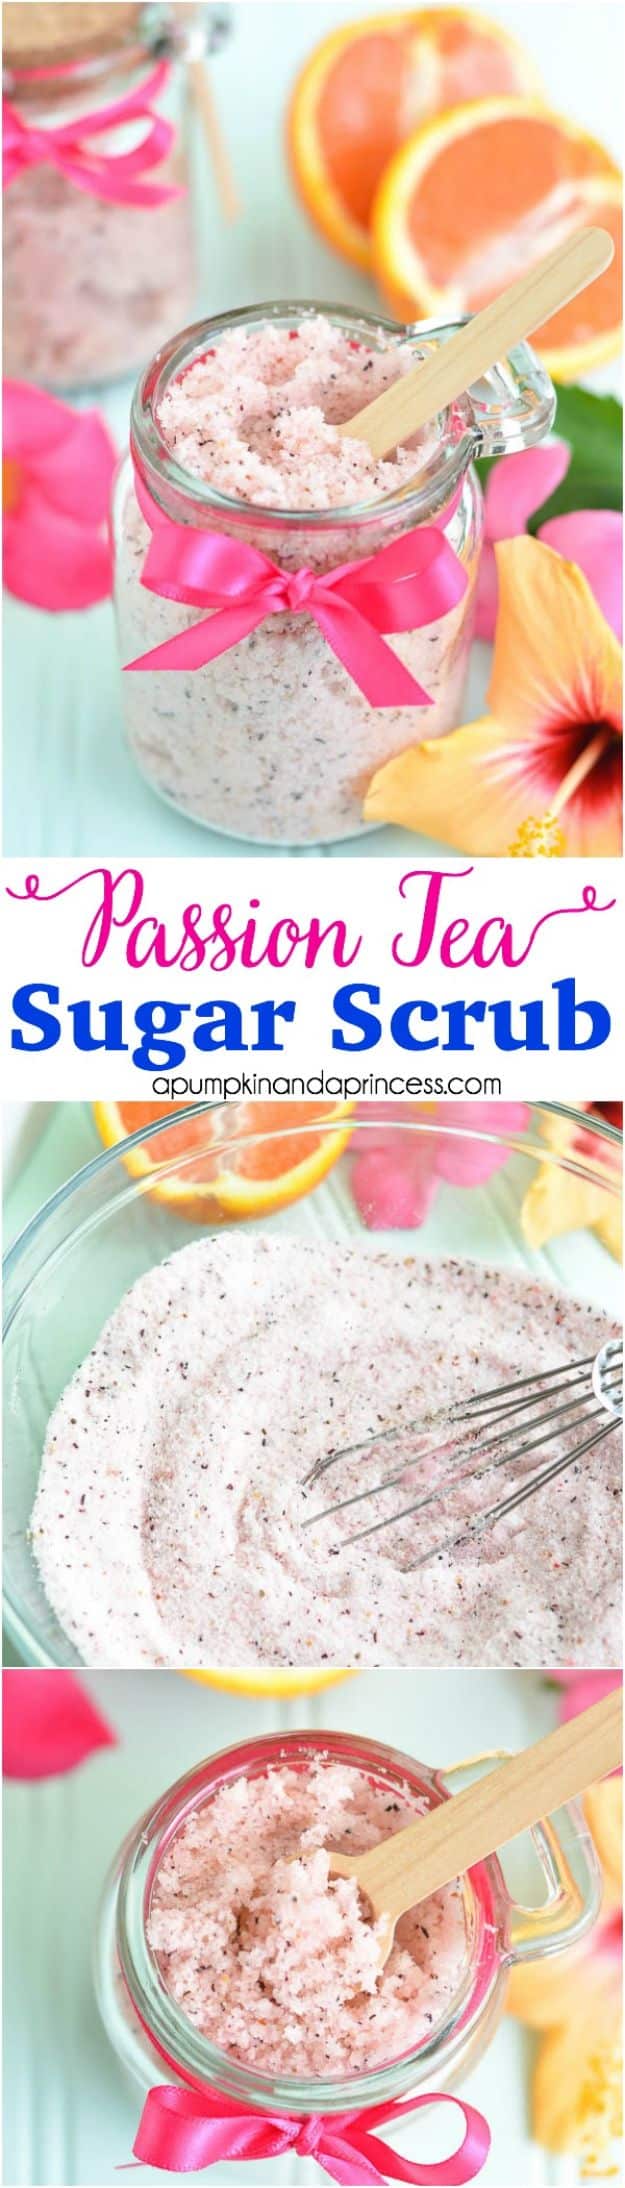 Best Mothers Day Ideas - Passion Tea Sugar Scrub - Easy and Cute DIY Projects to Make for Mom - Cool Gifts and Homemade Cards, Gift in A Jar Ideas - Cheap Things You Can Make for Your Mother http://diyjoy.com/diy-mothers-day-ideas